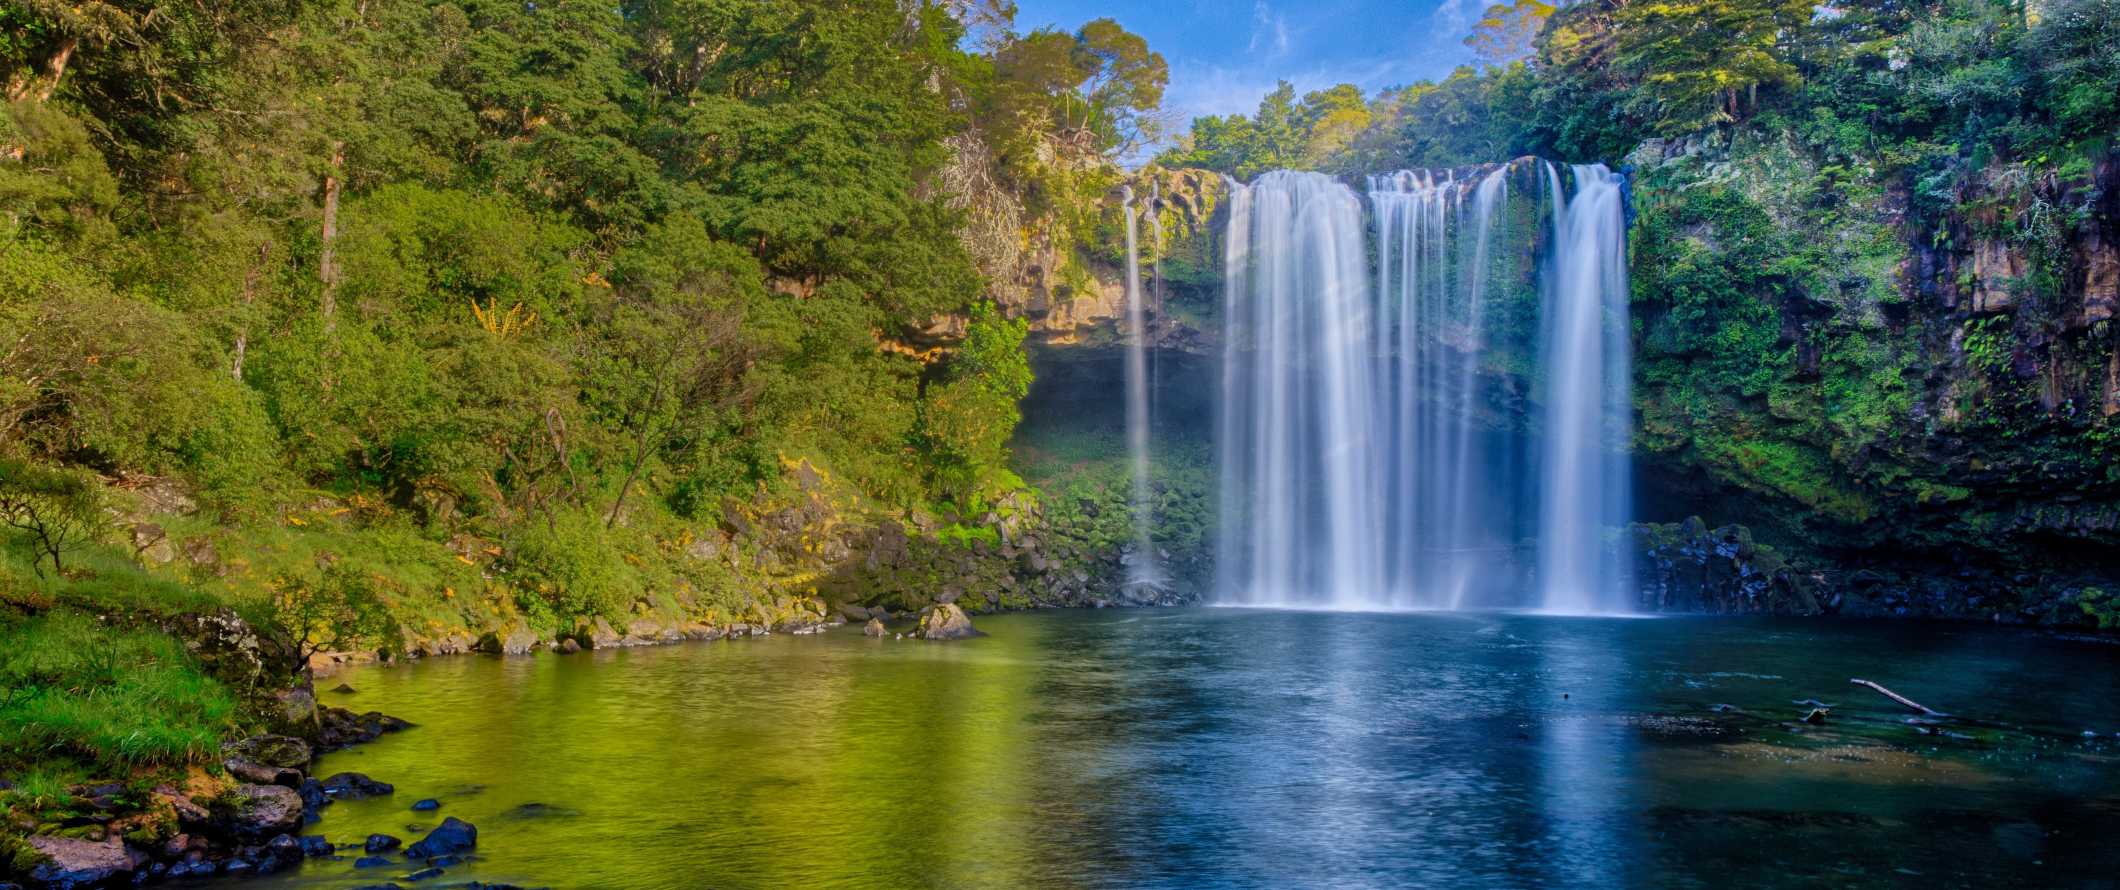 Rainbow Falls, a picturesque waterfall leading into a large pool in the forest in the Bay of Islands, New Zealand